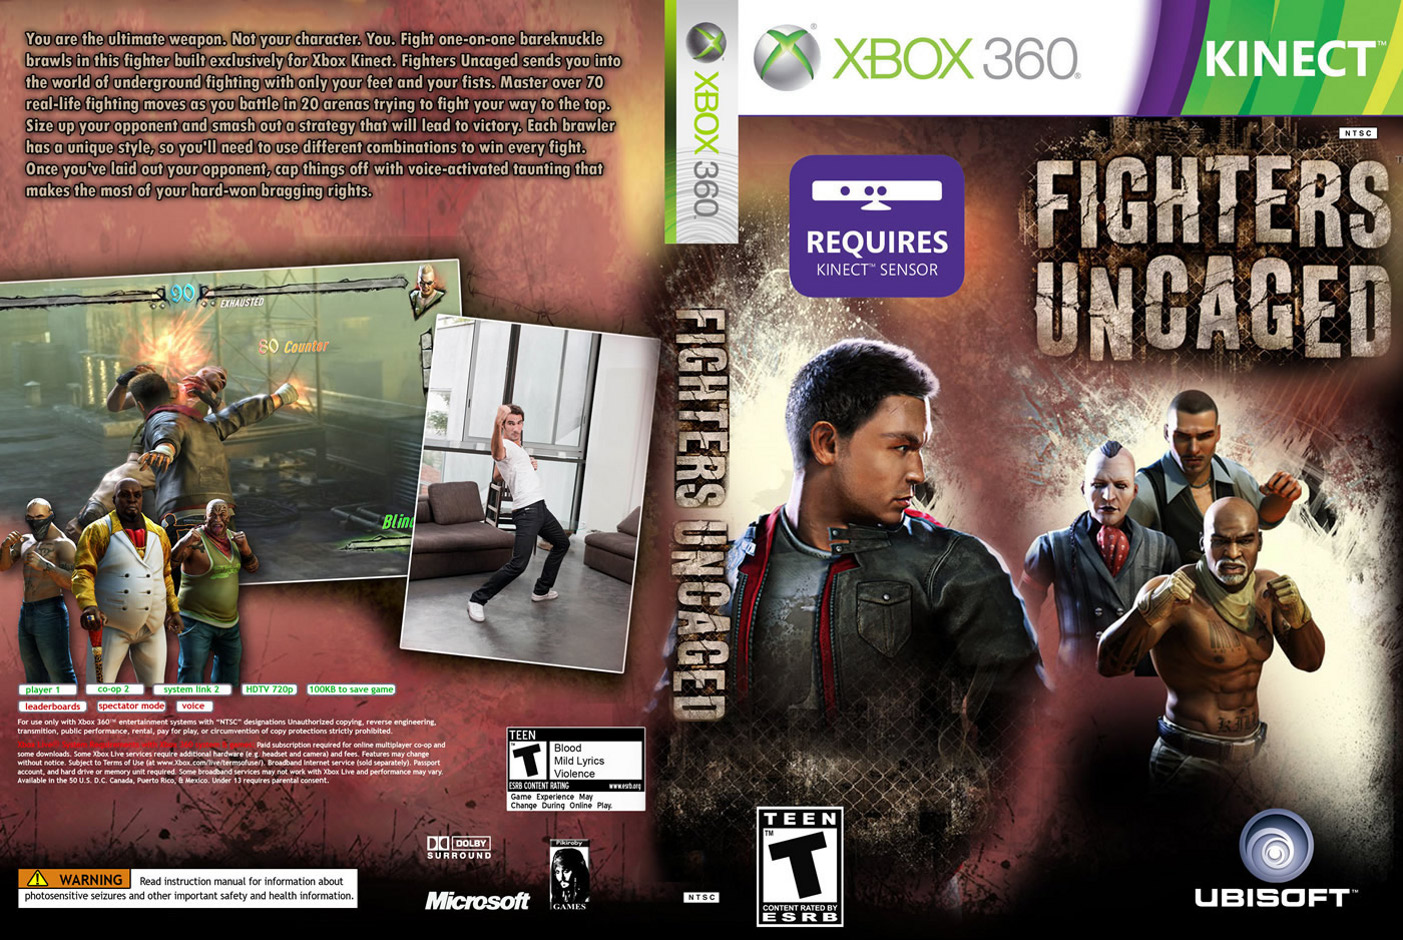 Xbox games download. Fighters Uncaged Xbox 360 Kinect. Fighters Uncaged (Xbox 360 Kinect) lt+3.0. Fighters Uncaged Xbox 360 Cover. Fighters Uncaged Xbox 360 обложка.